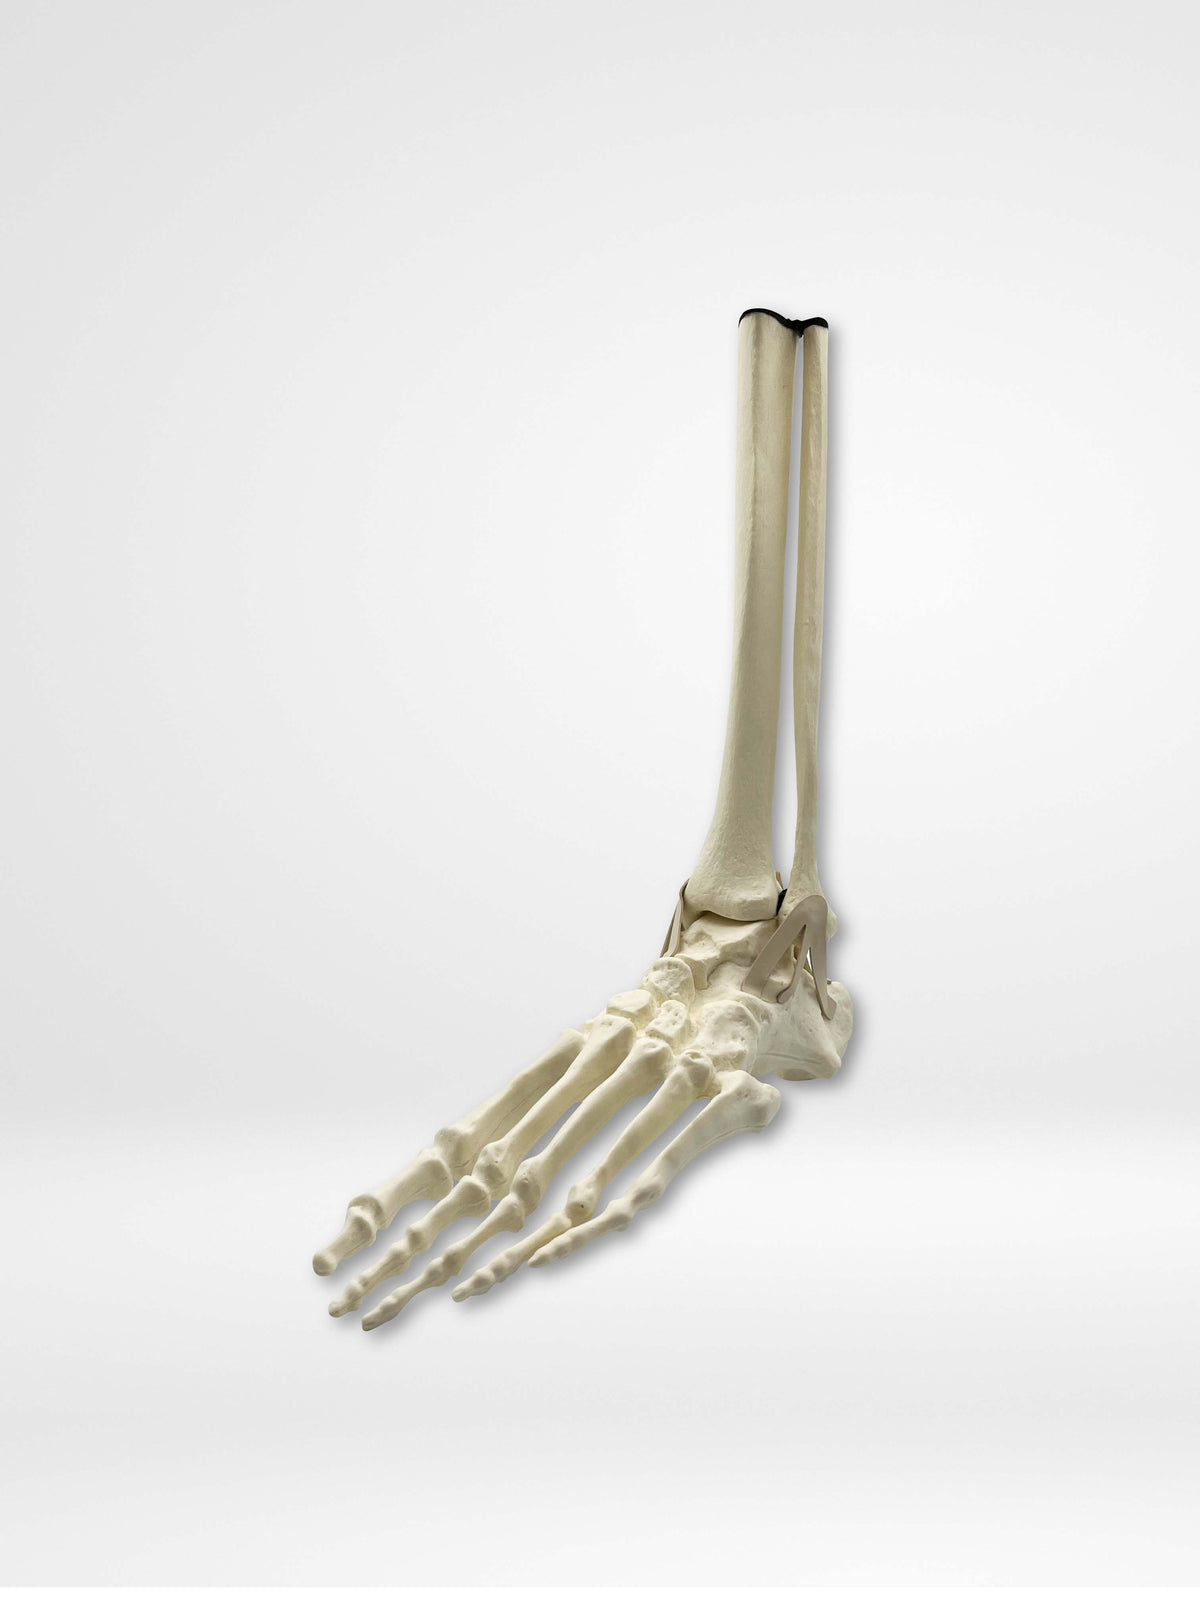 13656 - Left Articulated Ankle with Mid Shaft Tibia and Fibula